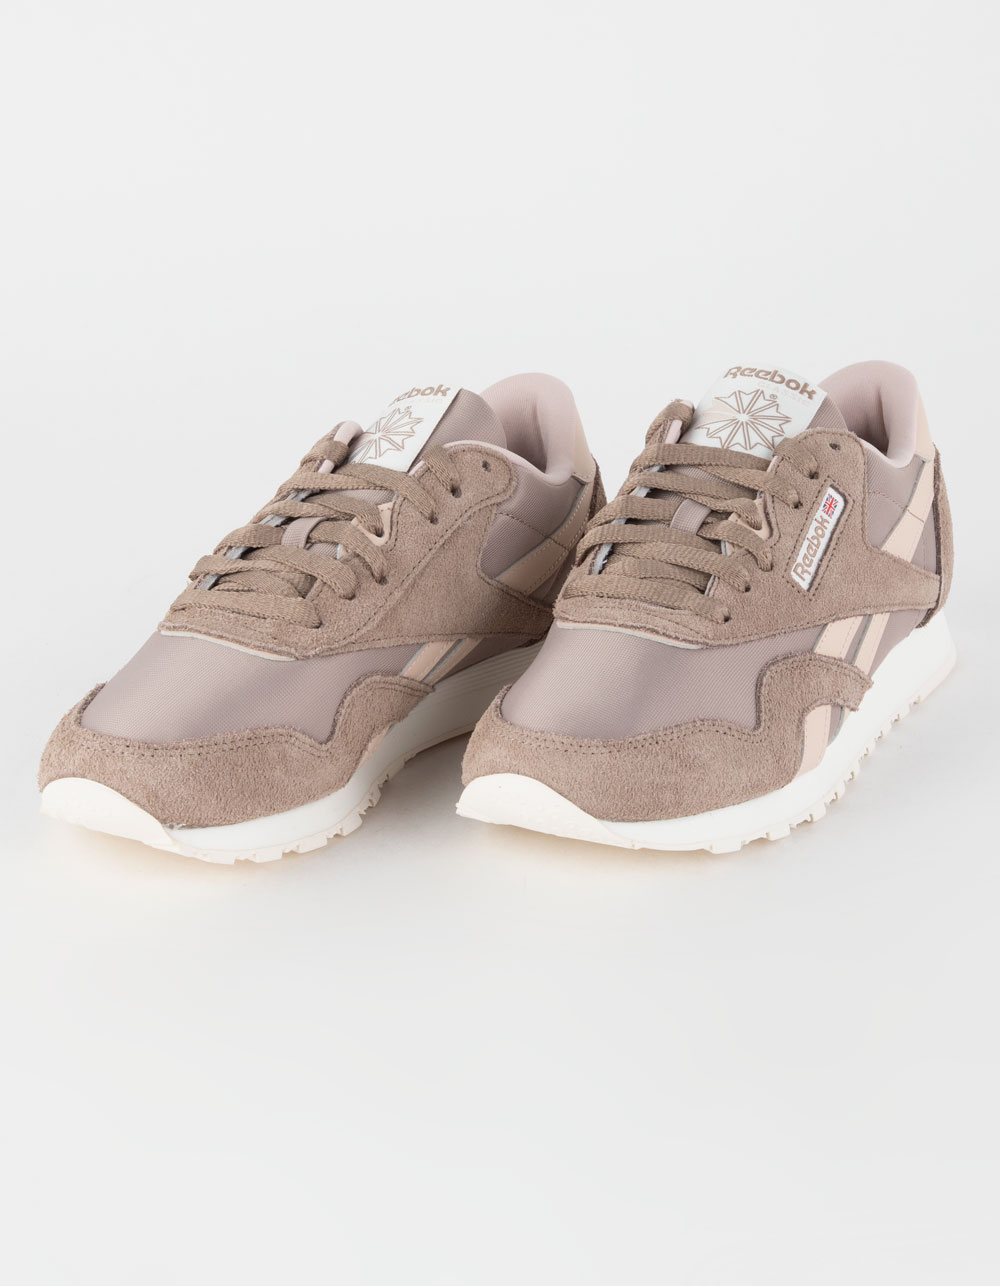 REEBOK Classic Nylon Vintage Pastel Womens Shoes - TAUPE | Tillys